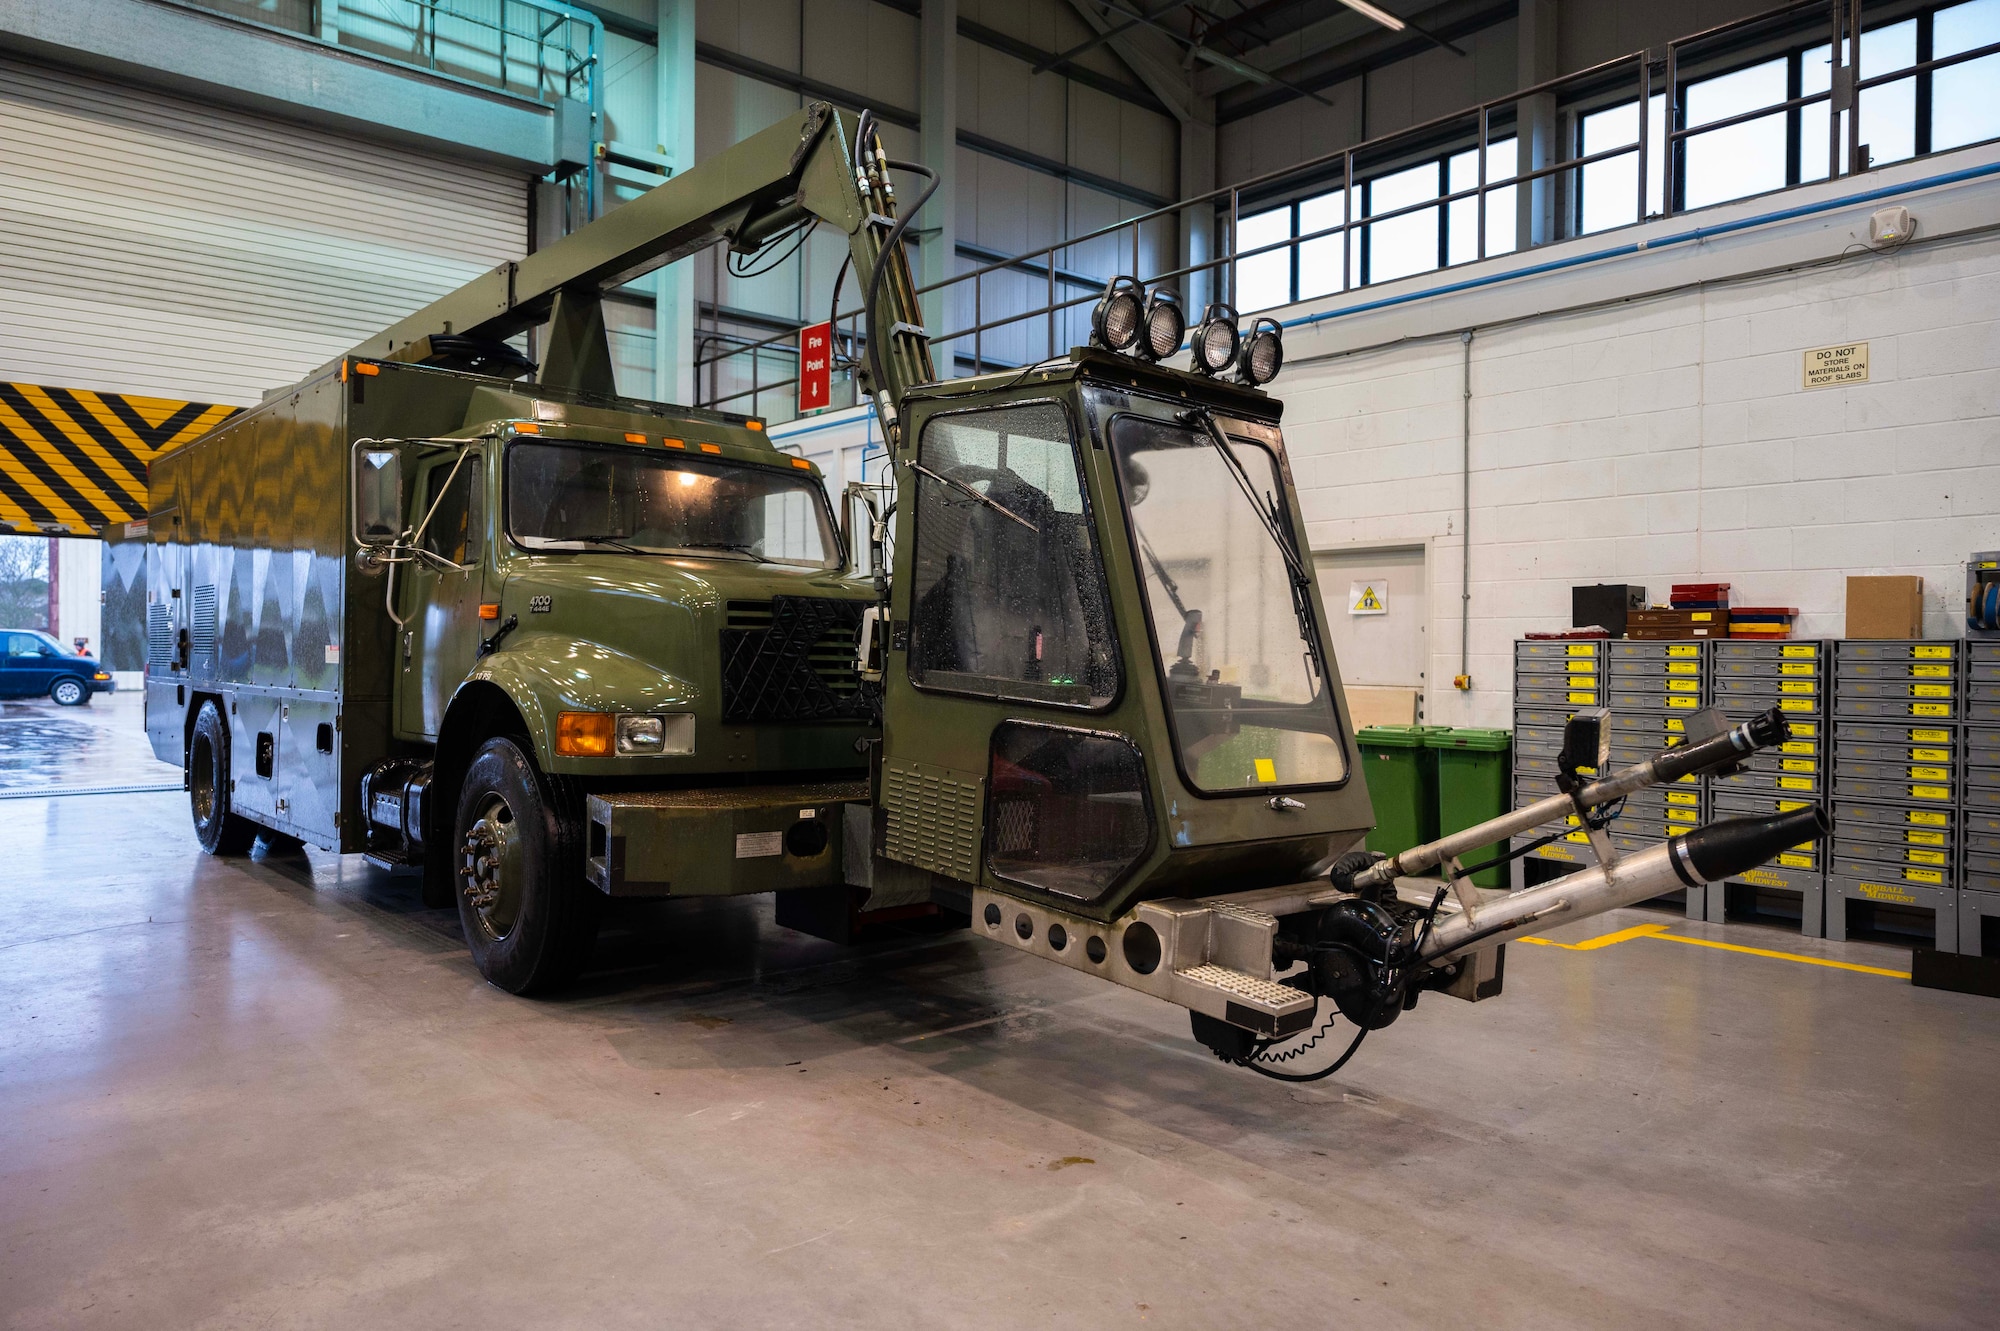 A U.S. government aircraft deicing truck prepares for routine maintenance at Royal Air Force Mildenhall, England, Jan. 9, 2023. Vehicle mechanics inspect, troubleshoot, order and replace parts to ensure vehicles run properly. (U.S. Air Force photo by Airman 1st Class Viviam Chiu)